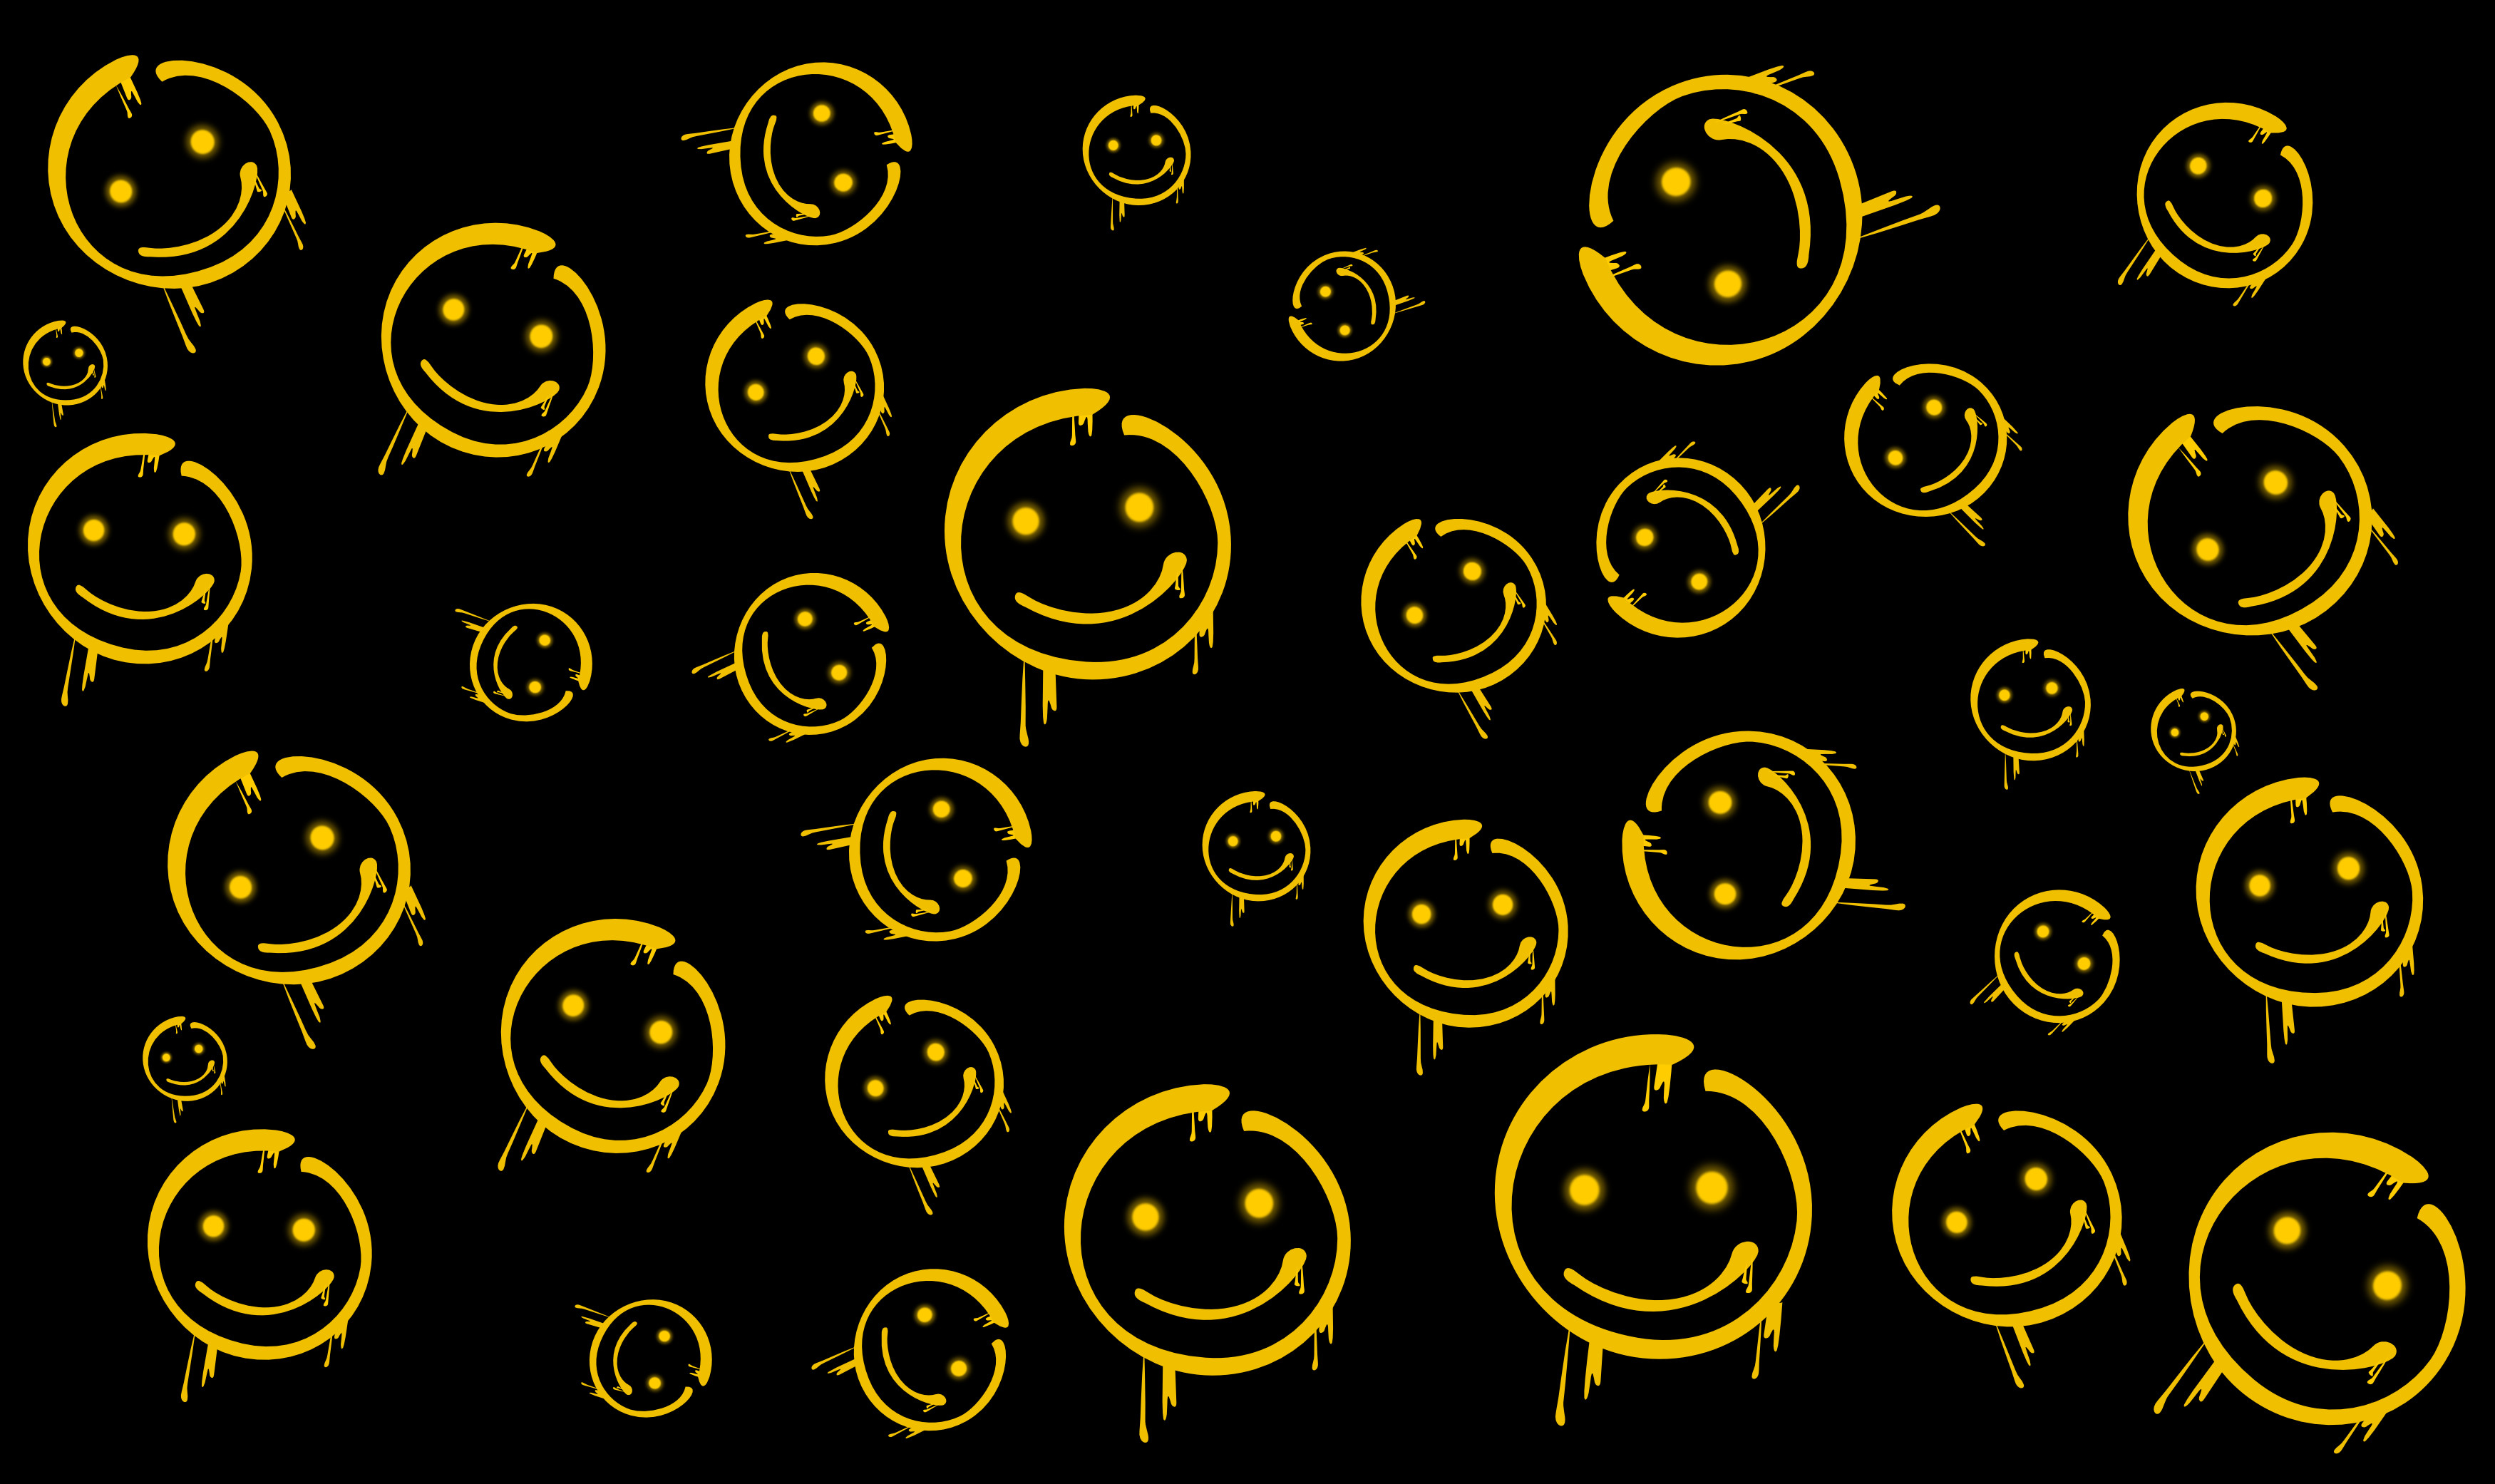 Cool Wallpapers Happy Face - Search free happy face wallpapers on zedge ...